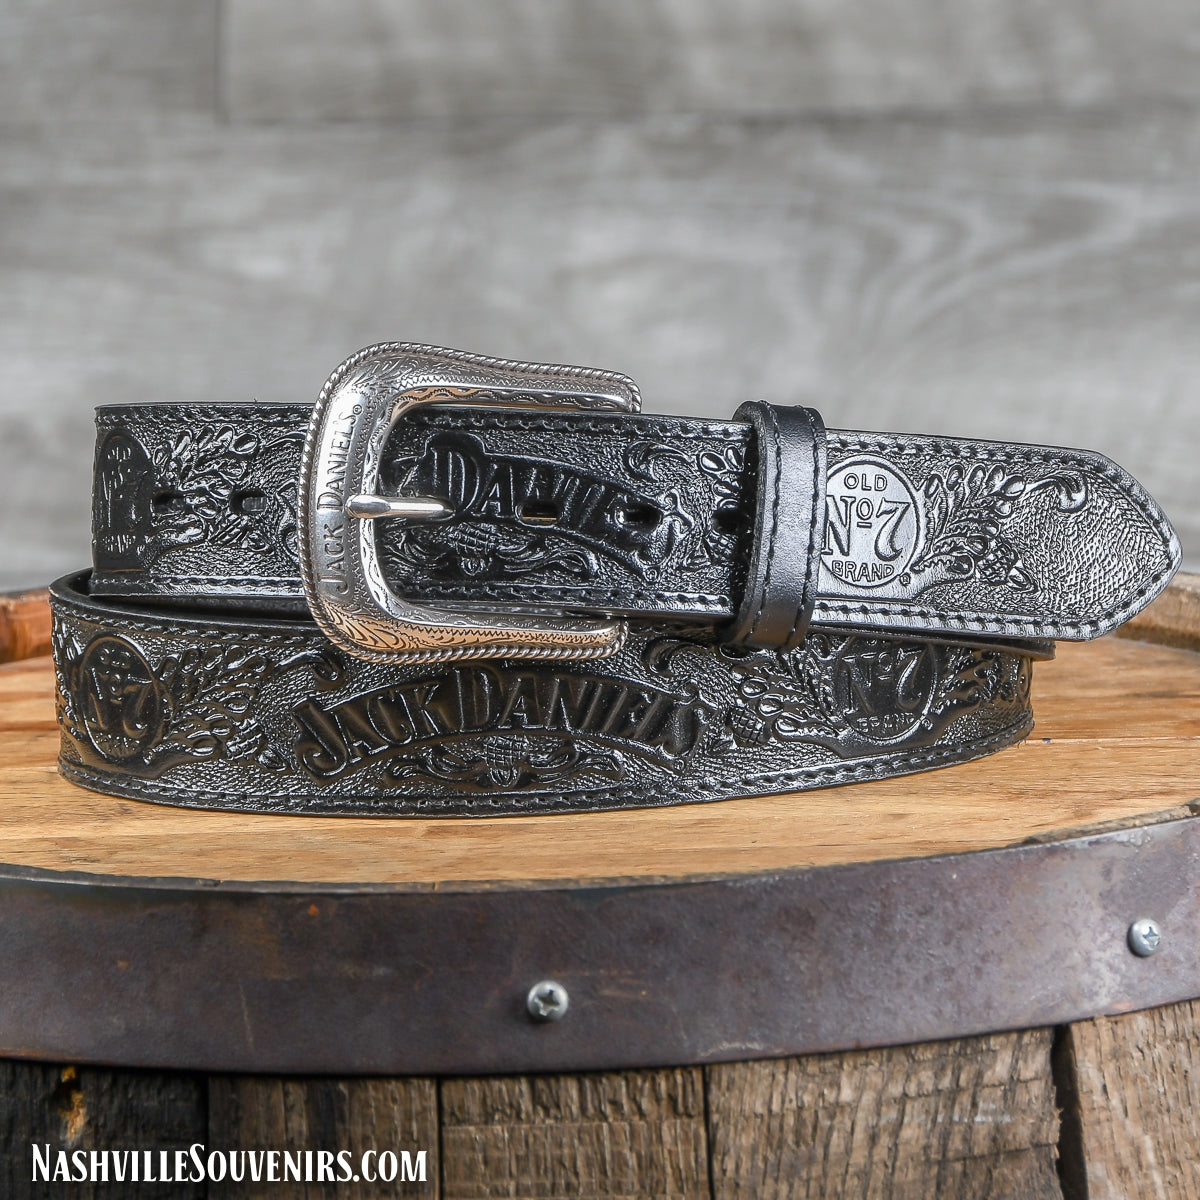 Officially licensed Black Jack Daniels Belt with Logos and Silver Buckle. Genuine full grain leather. Get yours today with FREE SHIPPING on all US orders over $75!